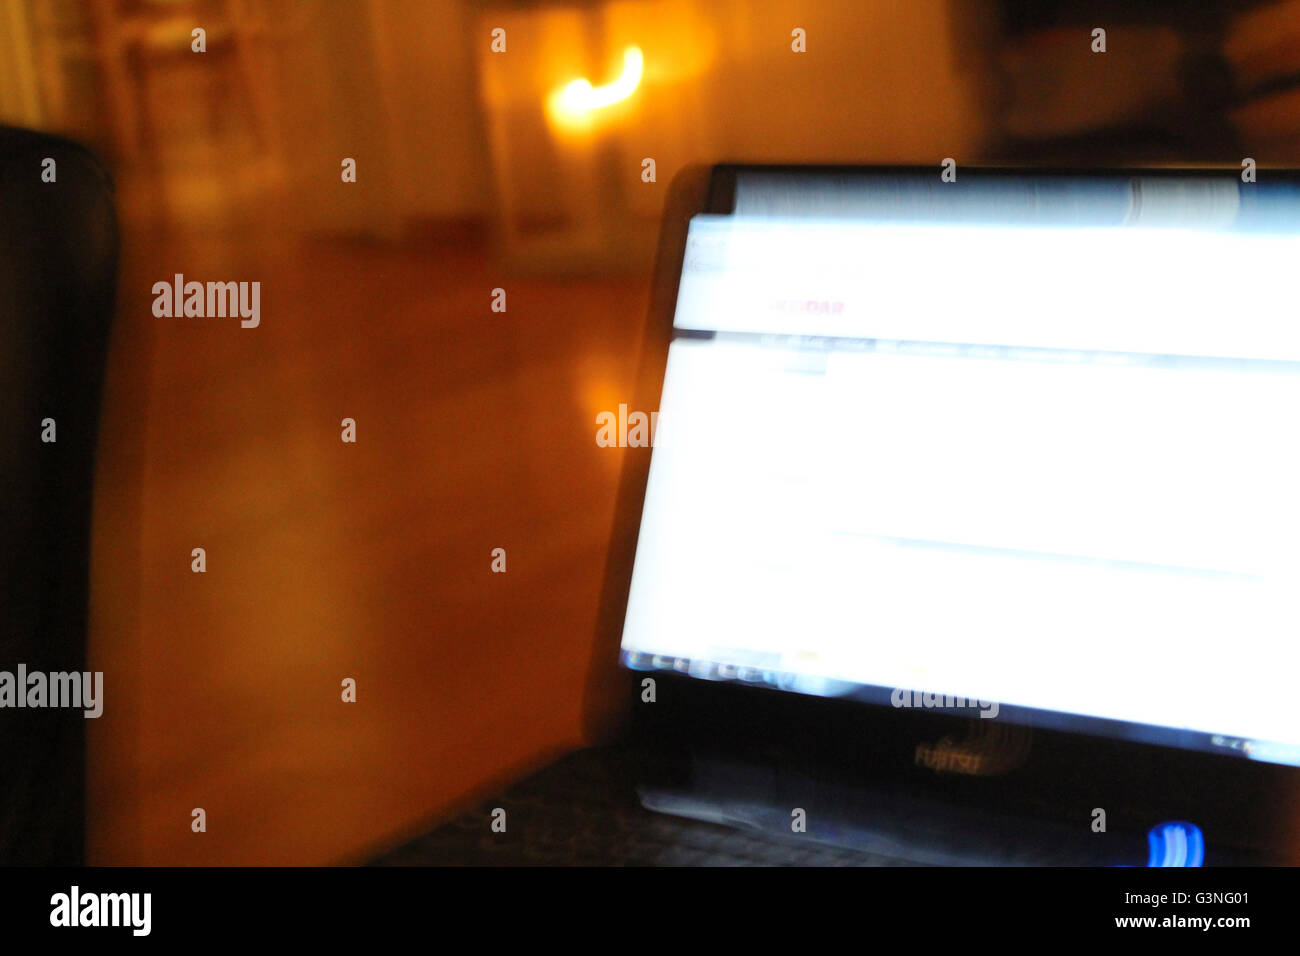 Computer screen with light in background, moving camera and blurred Stock Photo